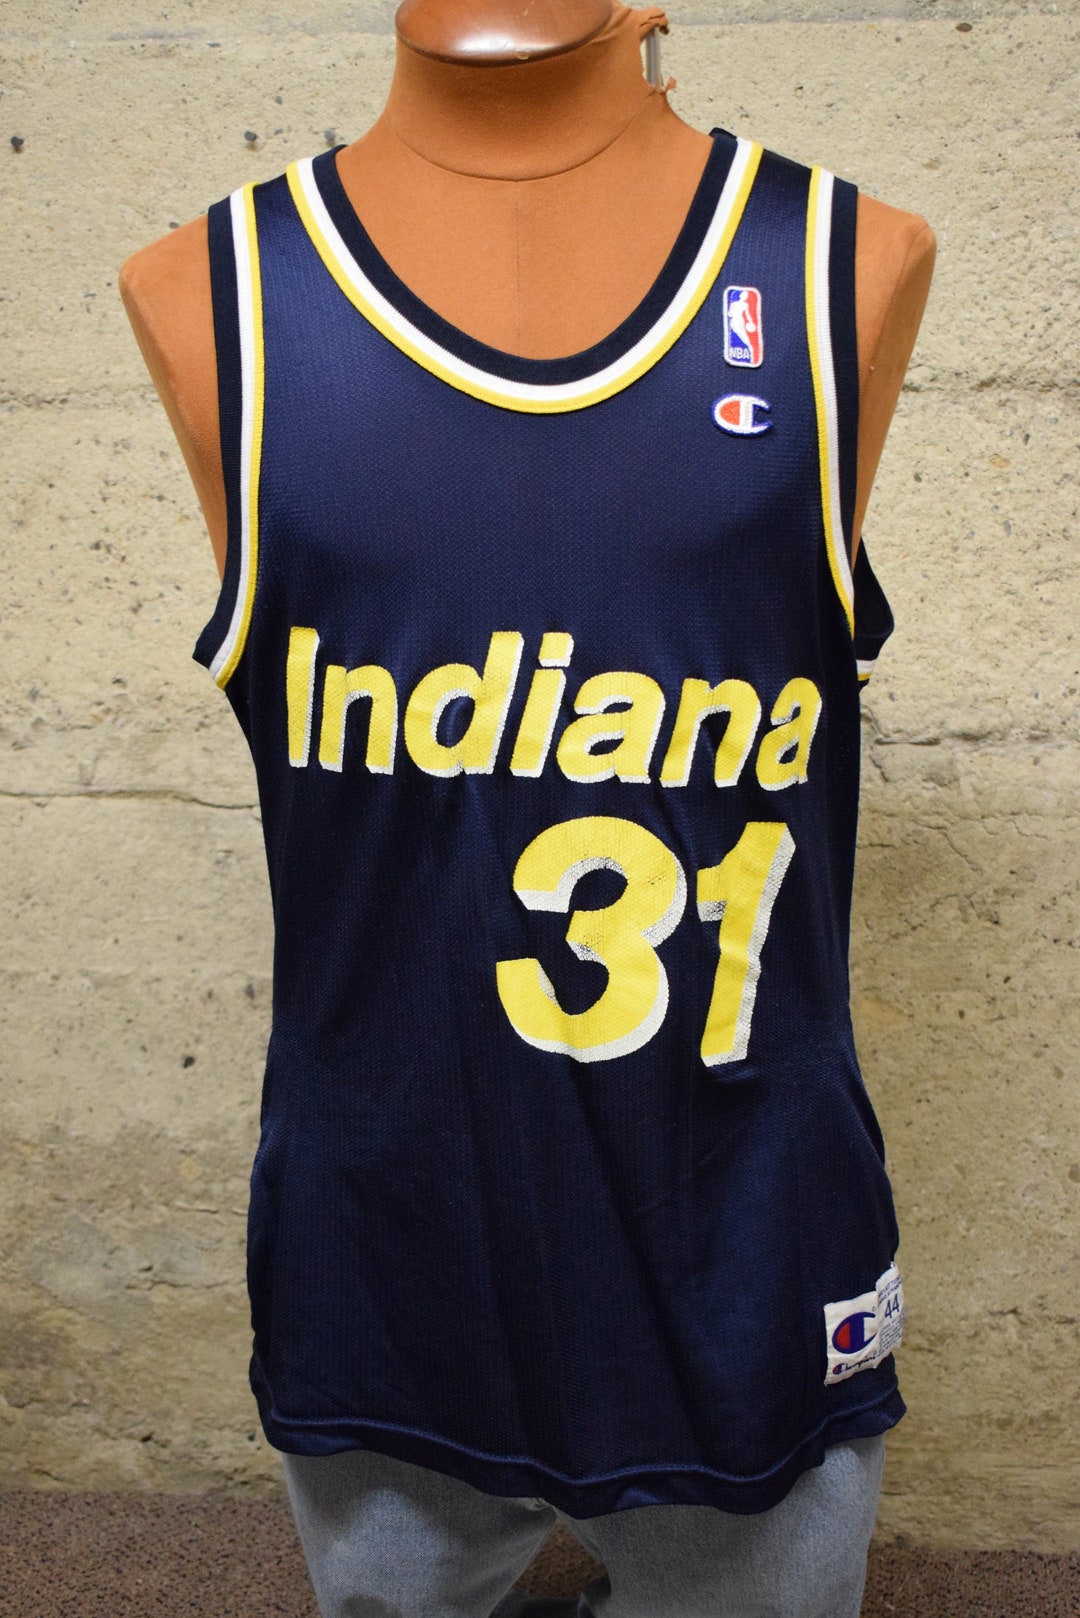 Official Indiana Pacers Gear, Pacers Jerseys, Pacers Shop, Apparel